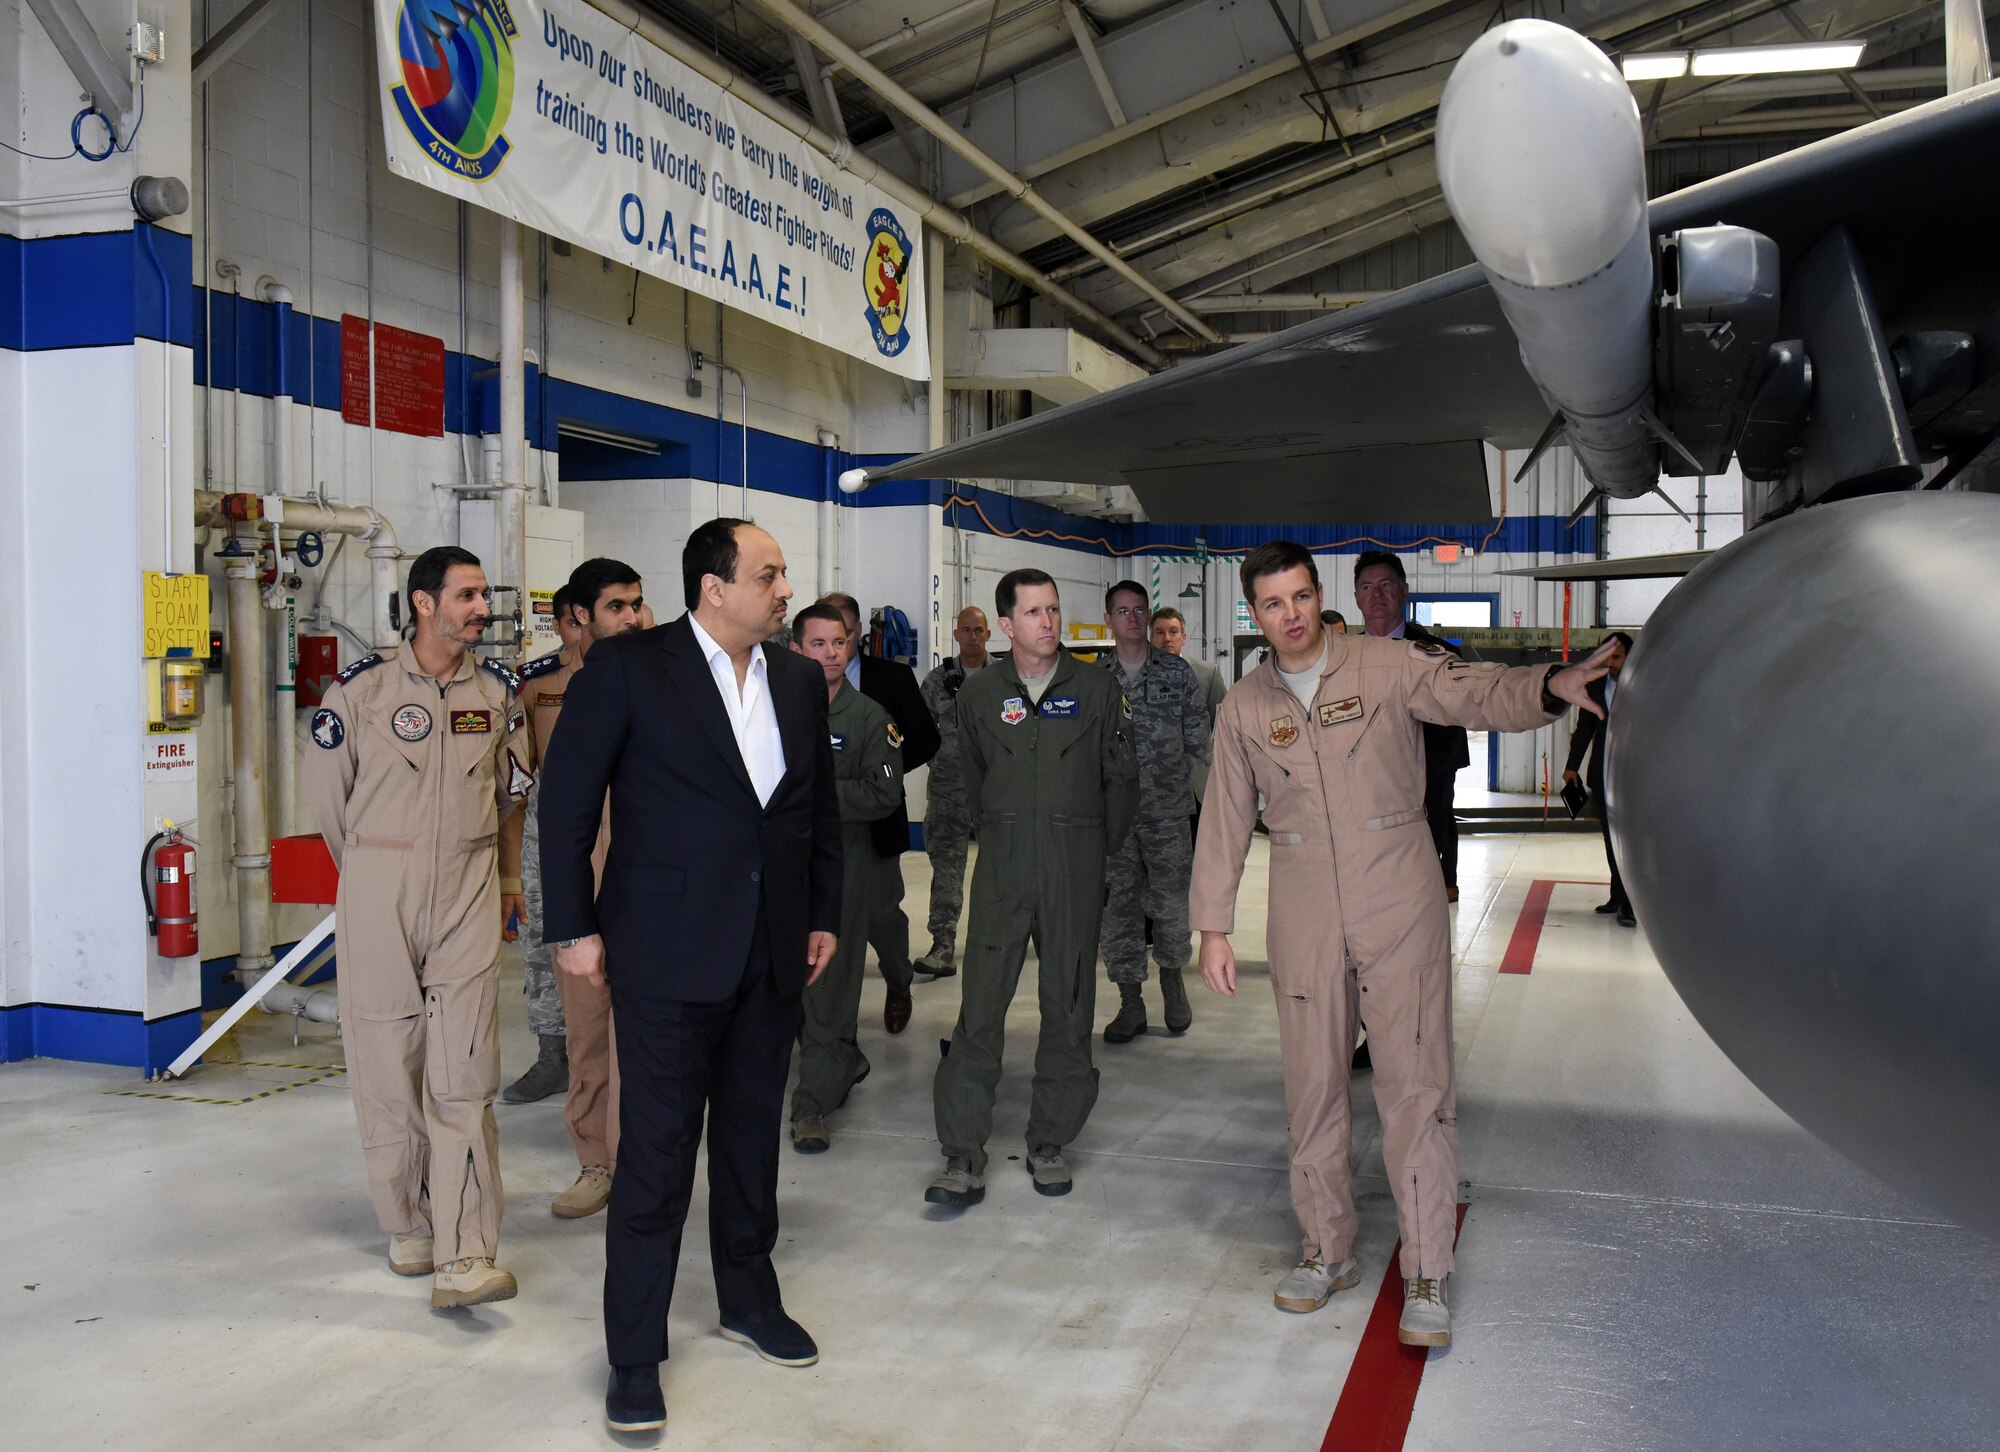 Lt. Col. Dave Haworth (right), Office of Military Cooperation at the U.S. Embassy in Qatar, showcases the F-15E Strike Eagle to his Excellency Khalid Mohammad Al Attiyah, Qatar's Minister of State for Defense Affairs, March 28, 2017, at Seymour Johnson Air Force Base, North Carolina. After a base tour, his Excellency flew in the backseat of an F-15E to experience the aircraft’s capabilities firsthand. (U.S. Air Force photo by Airman 1st Class Kenneth Boyton)